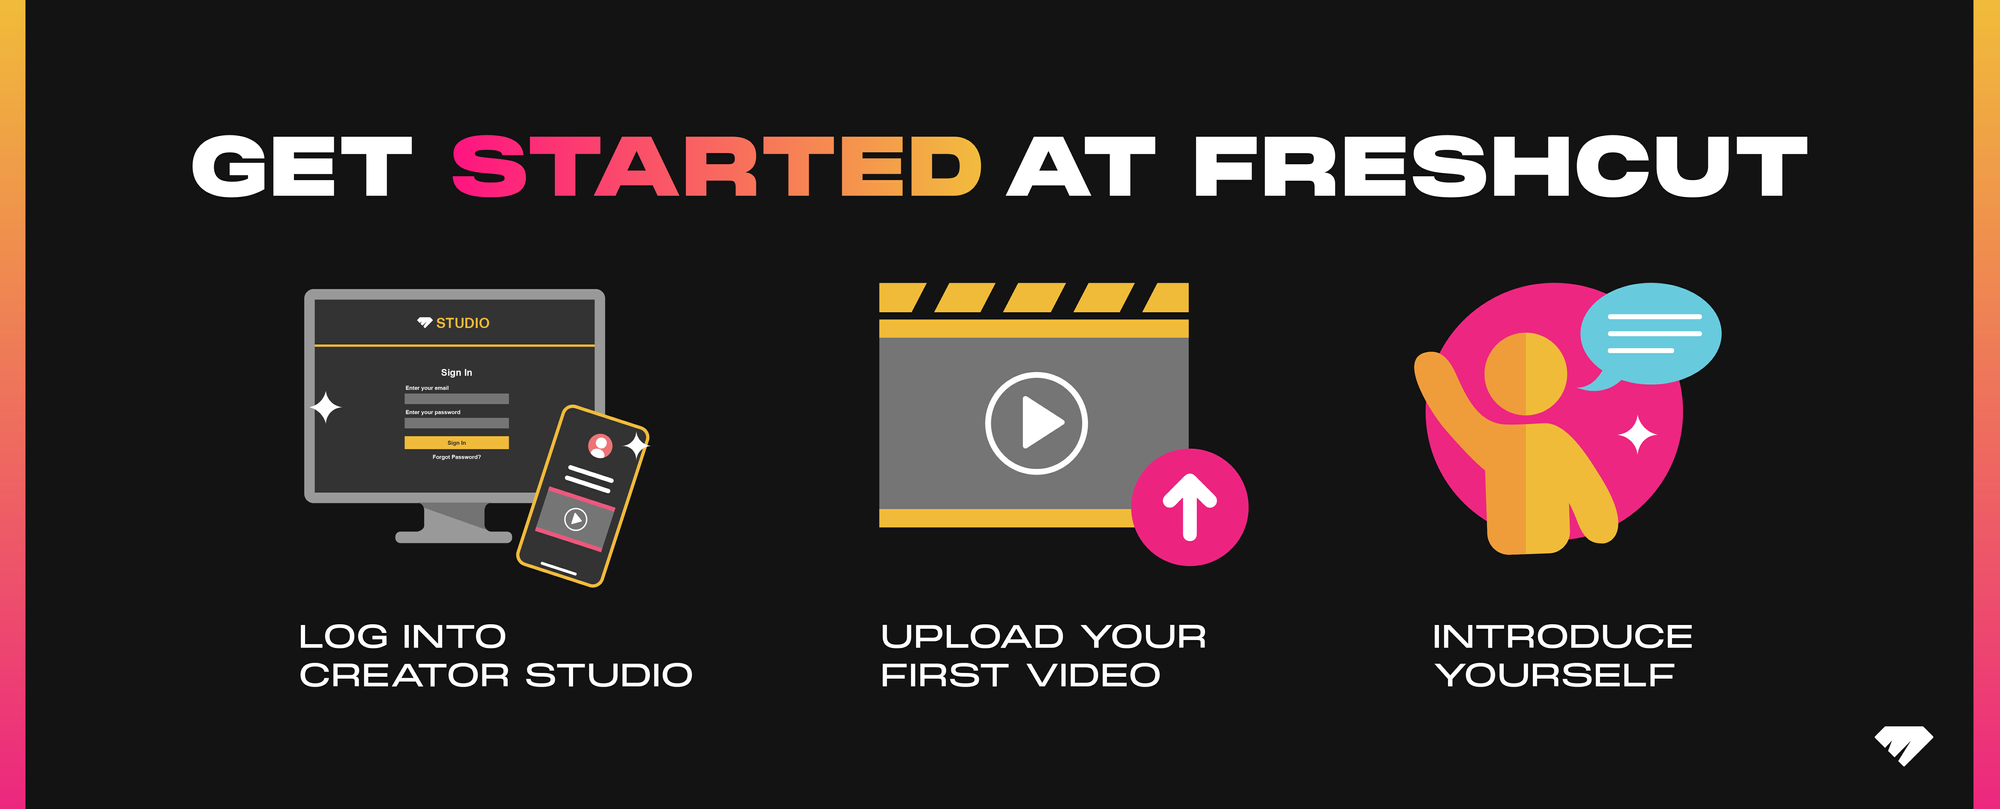 The Creator’s Guide to Uploading Videos to FreshCut